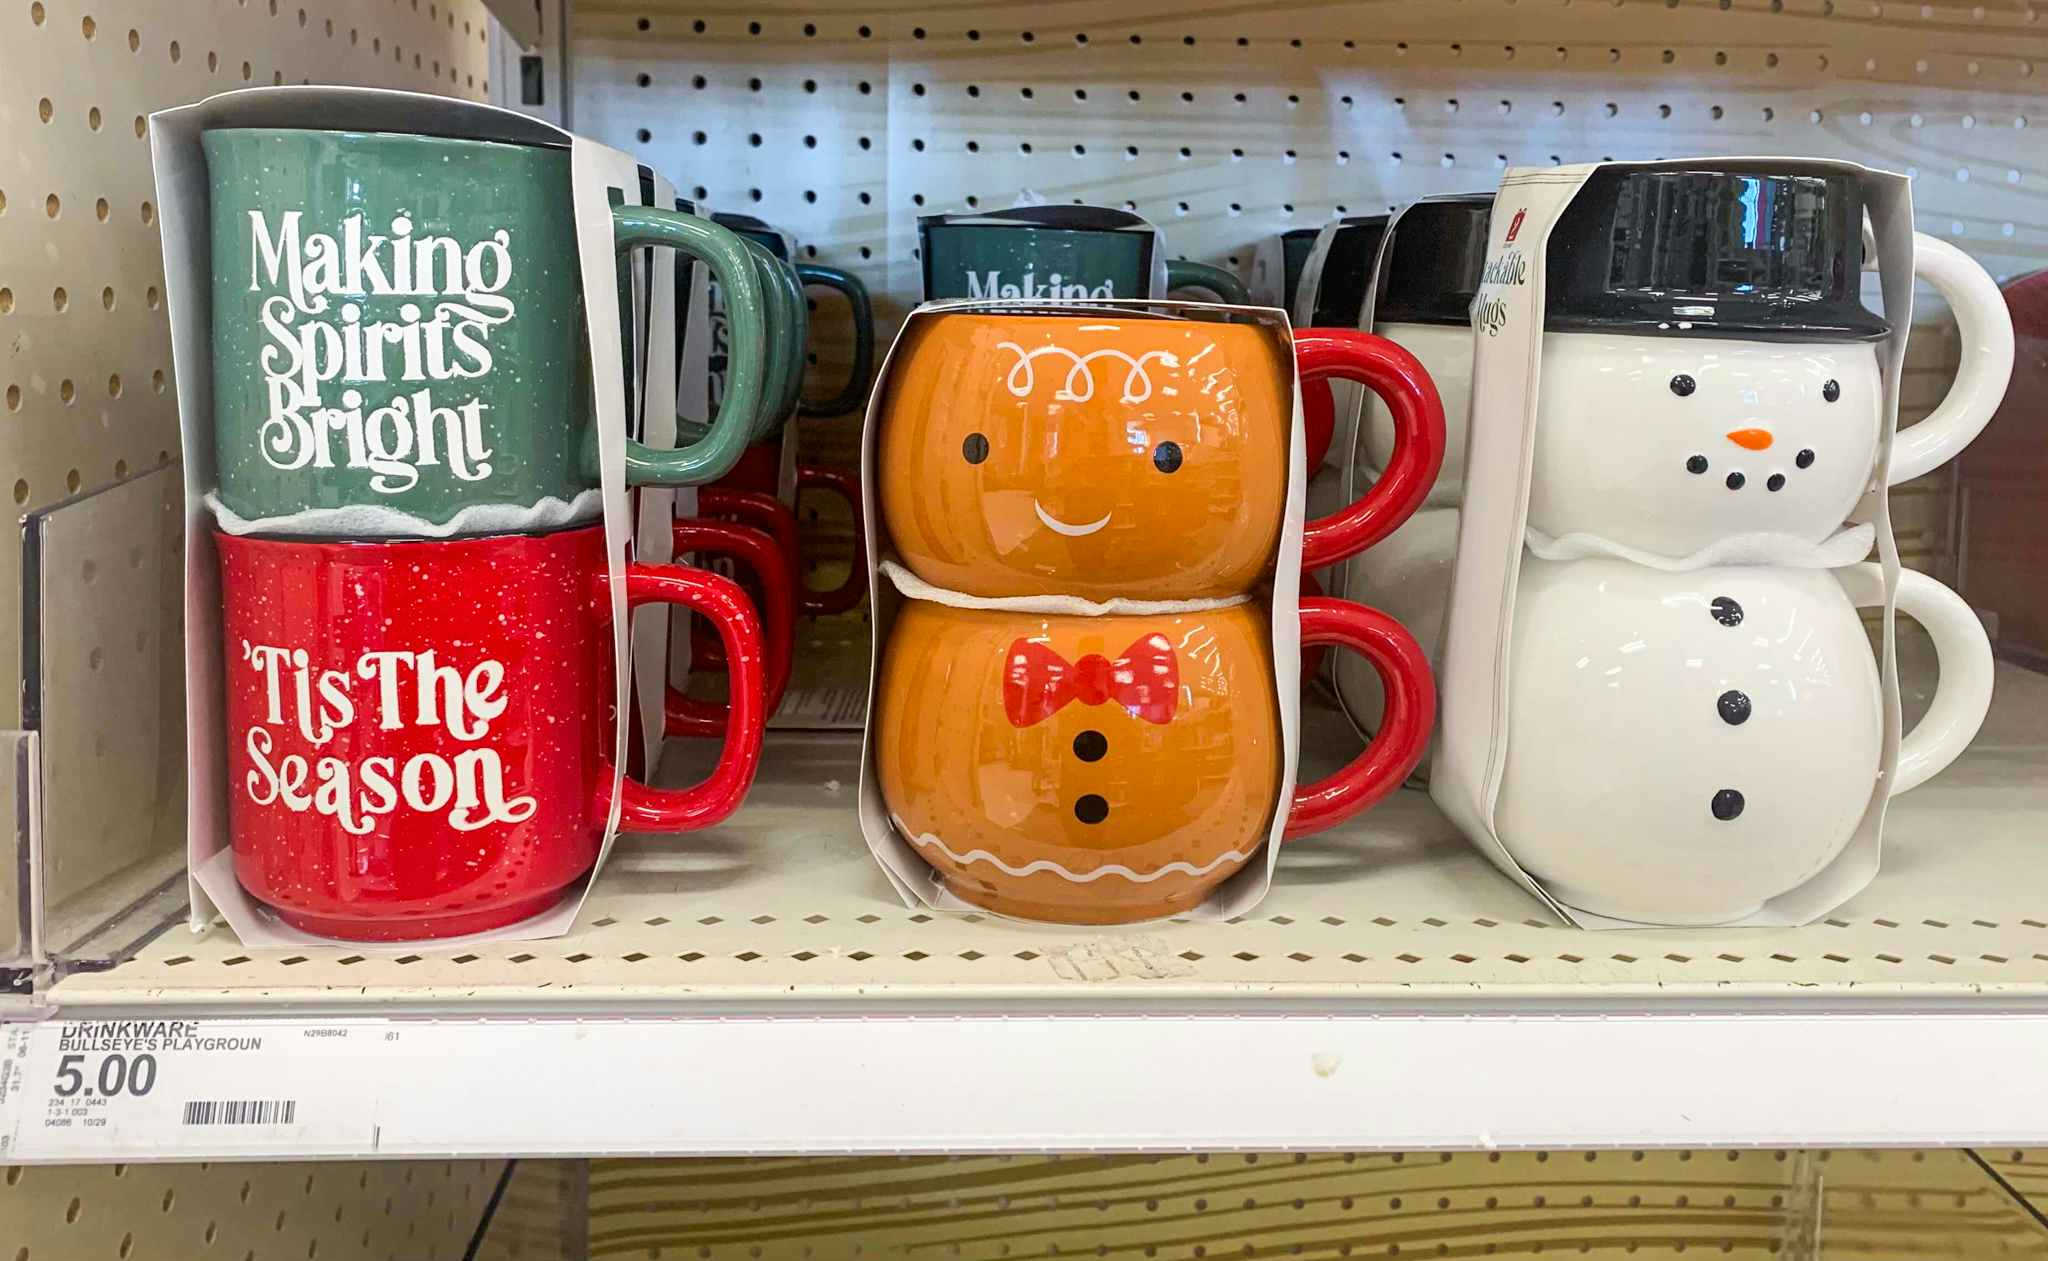 NEW* $5 Target Christmas Mugs, Lots of Fun Designs Available!